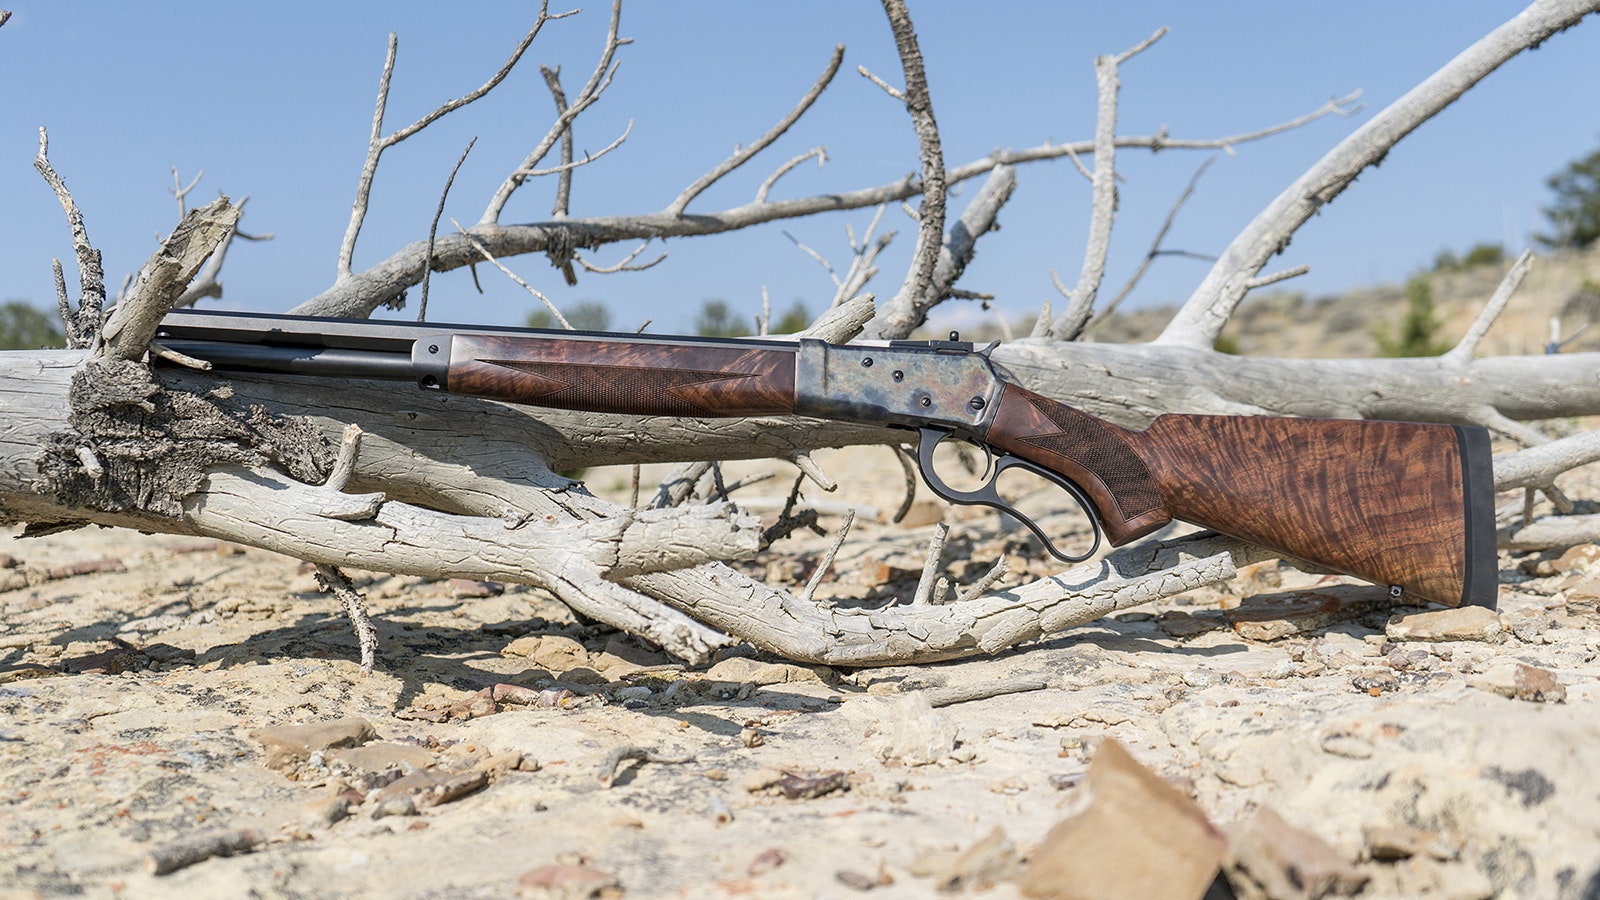 Along with the AR 500 semi-automatic, the Big Horn Armory in Cody builds high-end, magnum-caliber lever-action rifles.